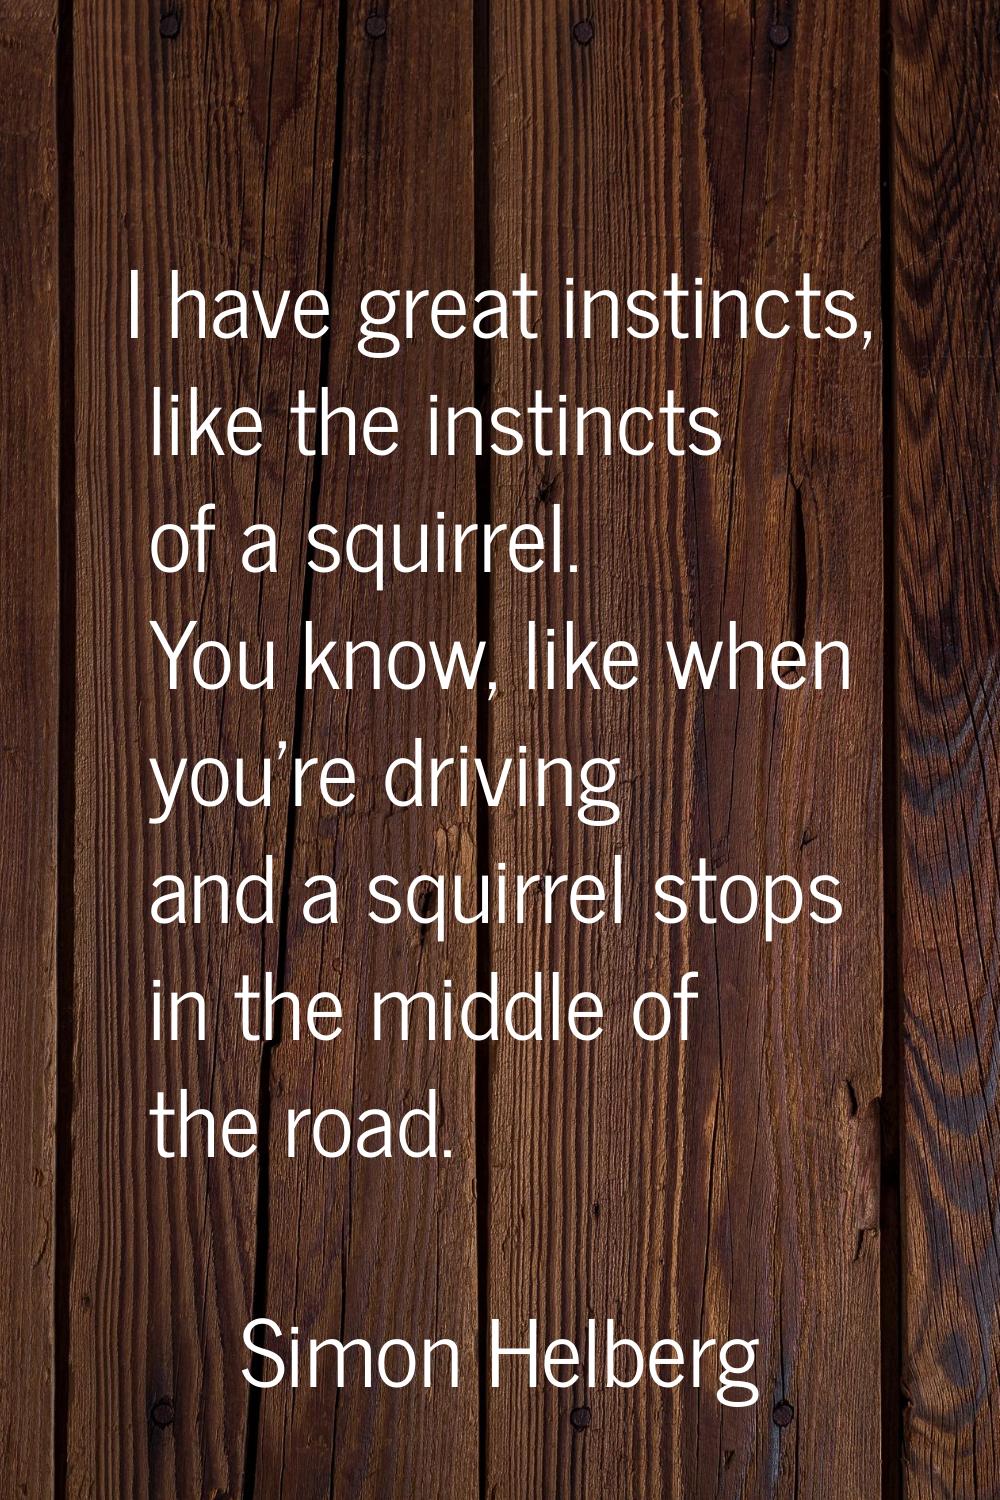 I have great instincts, like the instincts of a squirrel. You know, like when you're driving and a 